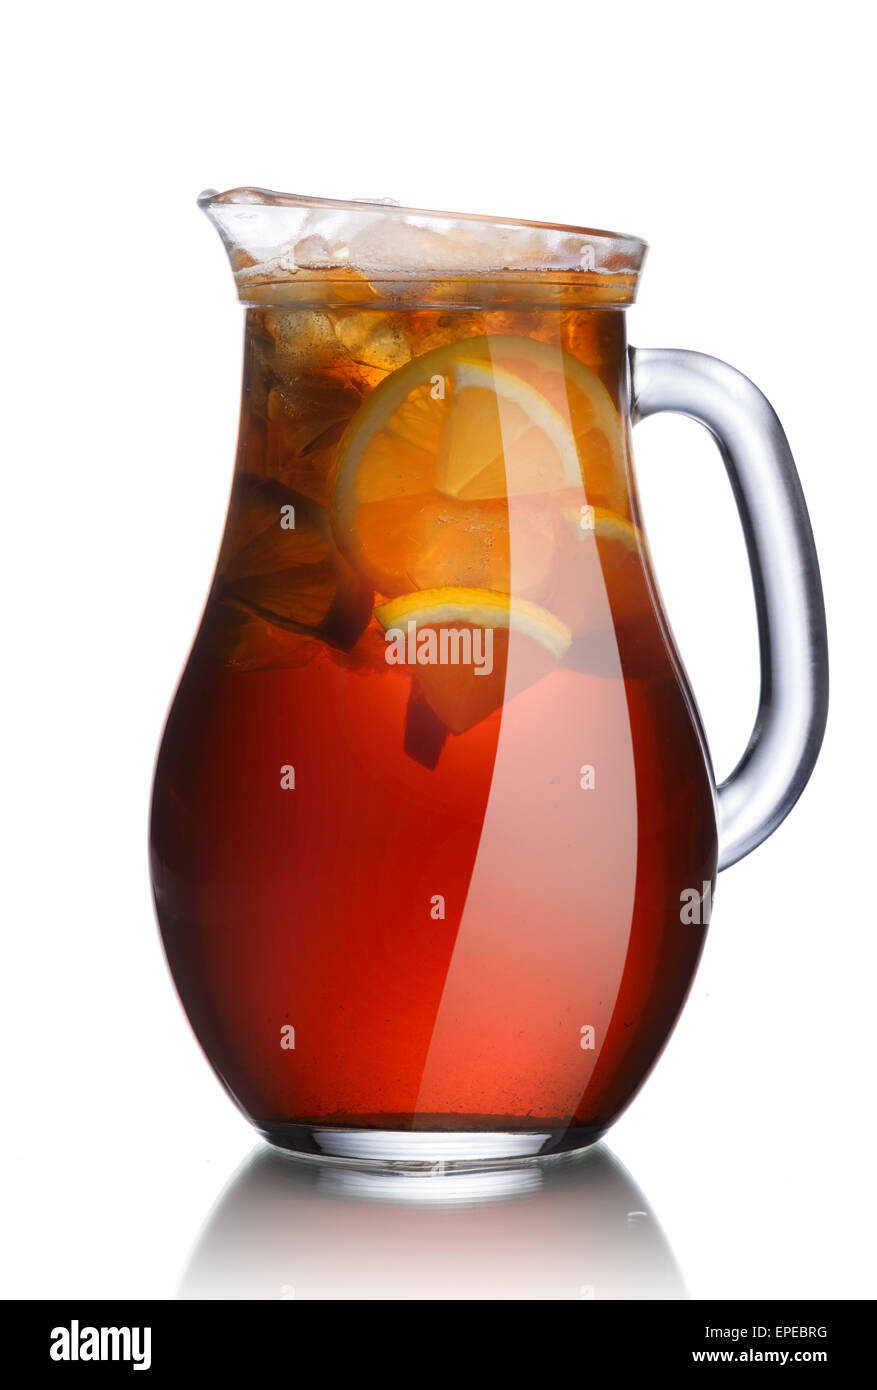 https://c8.alamy.com/comp/EPEBRG/iced-tea-in-a-pitcher-jug-full-of-fresh-lemon-tea-served-with-ice-EPEBRG.jpg